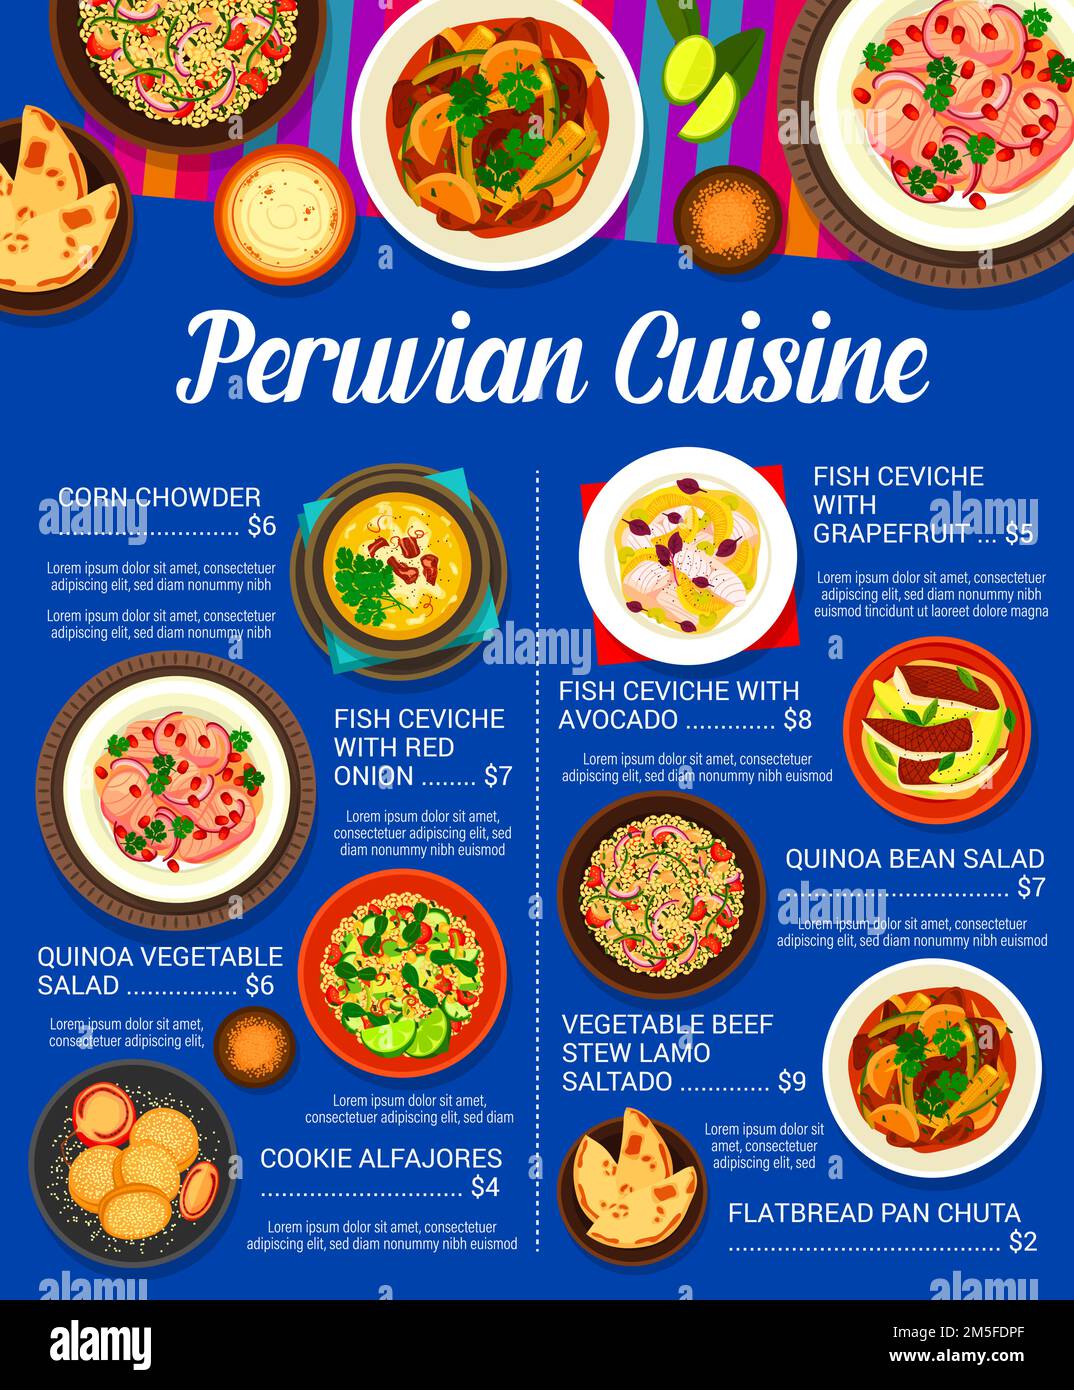 Peruvian cuisine menu with vector fish, meat and vegetable food. Seafood ceviche and beef stew lomo saltado with flatbread and quinoa salad, corn chowder and dulce de leche sandwich cookie alfajor Stock Vector